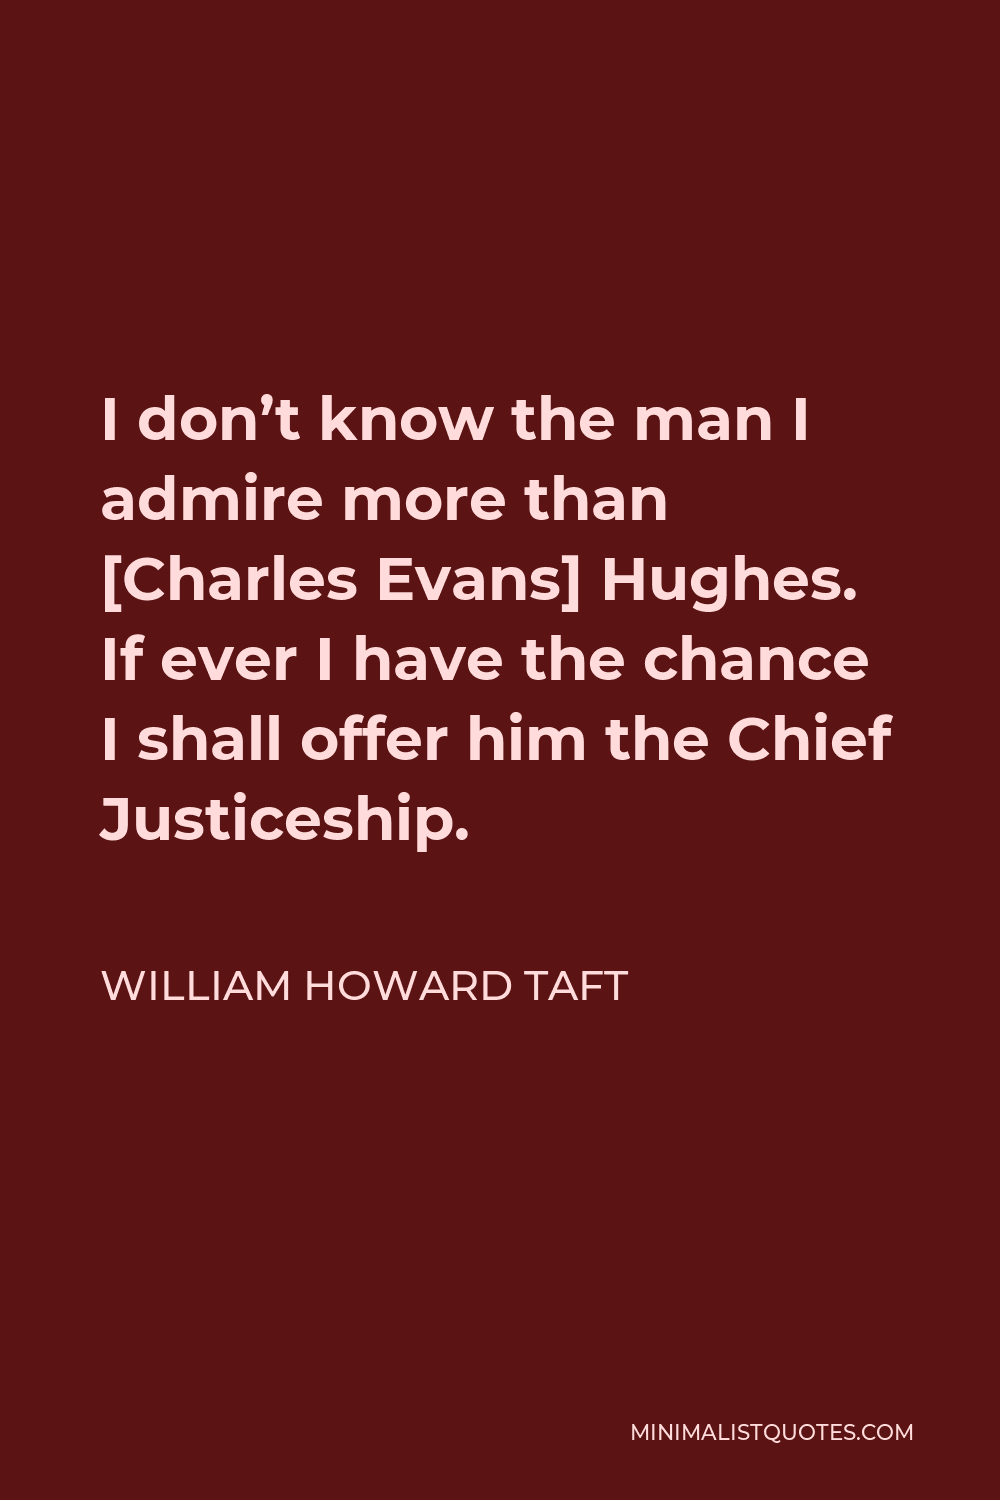 William Howard Taft Quote - I don’t know the man I admire more than [Charles Evans] Hughes. If ever I have the chance I shall offer him the Chief Justiceship.